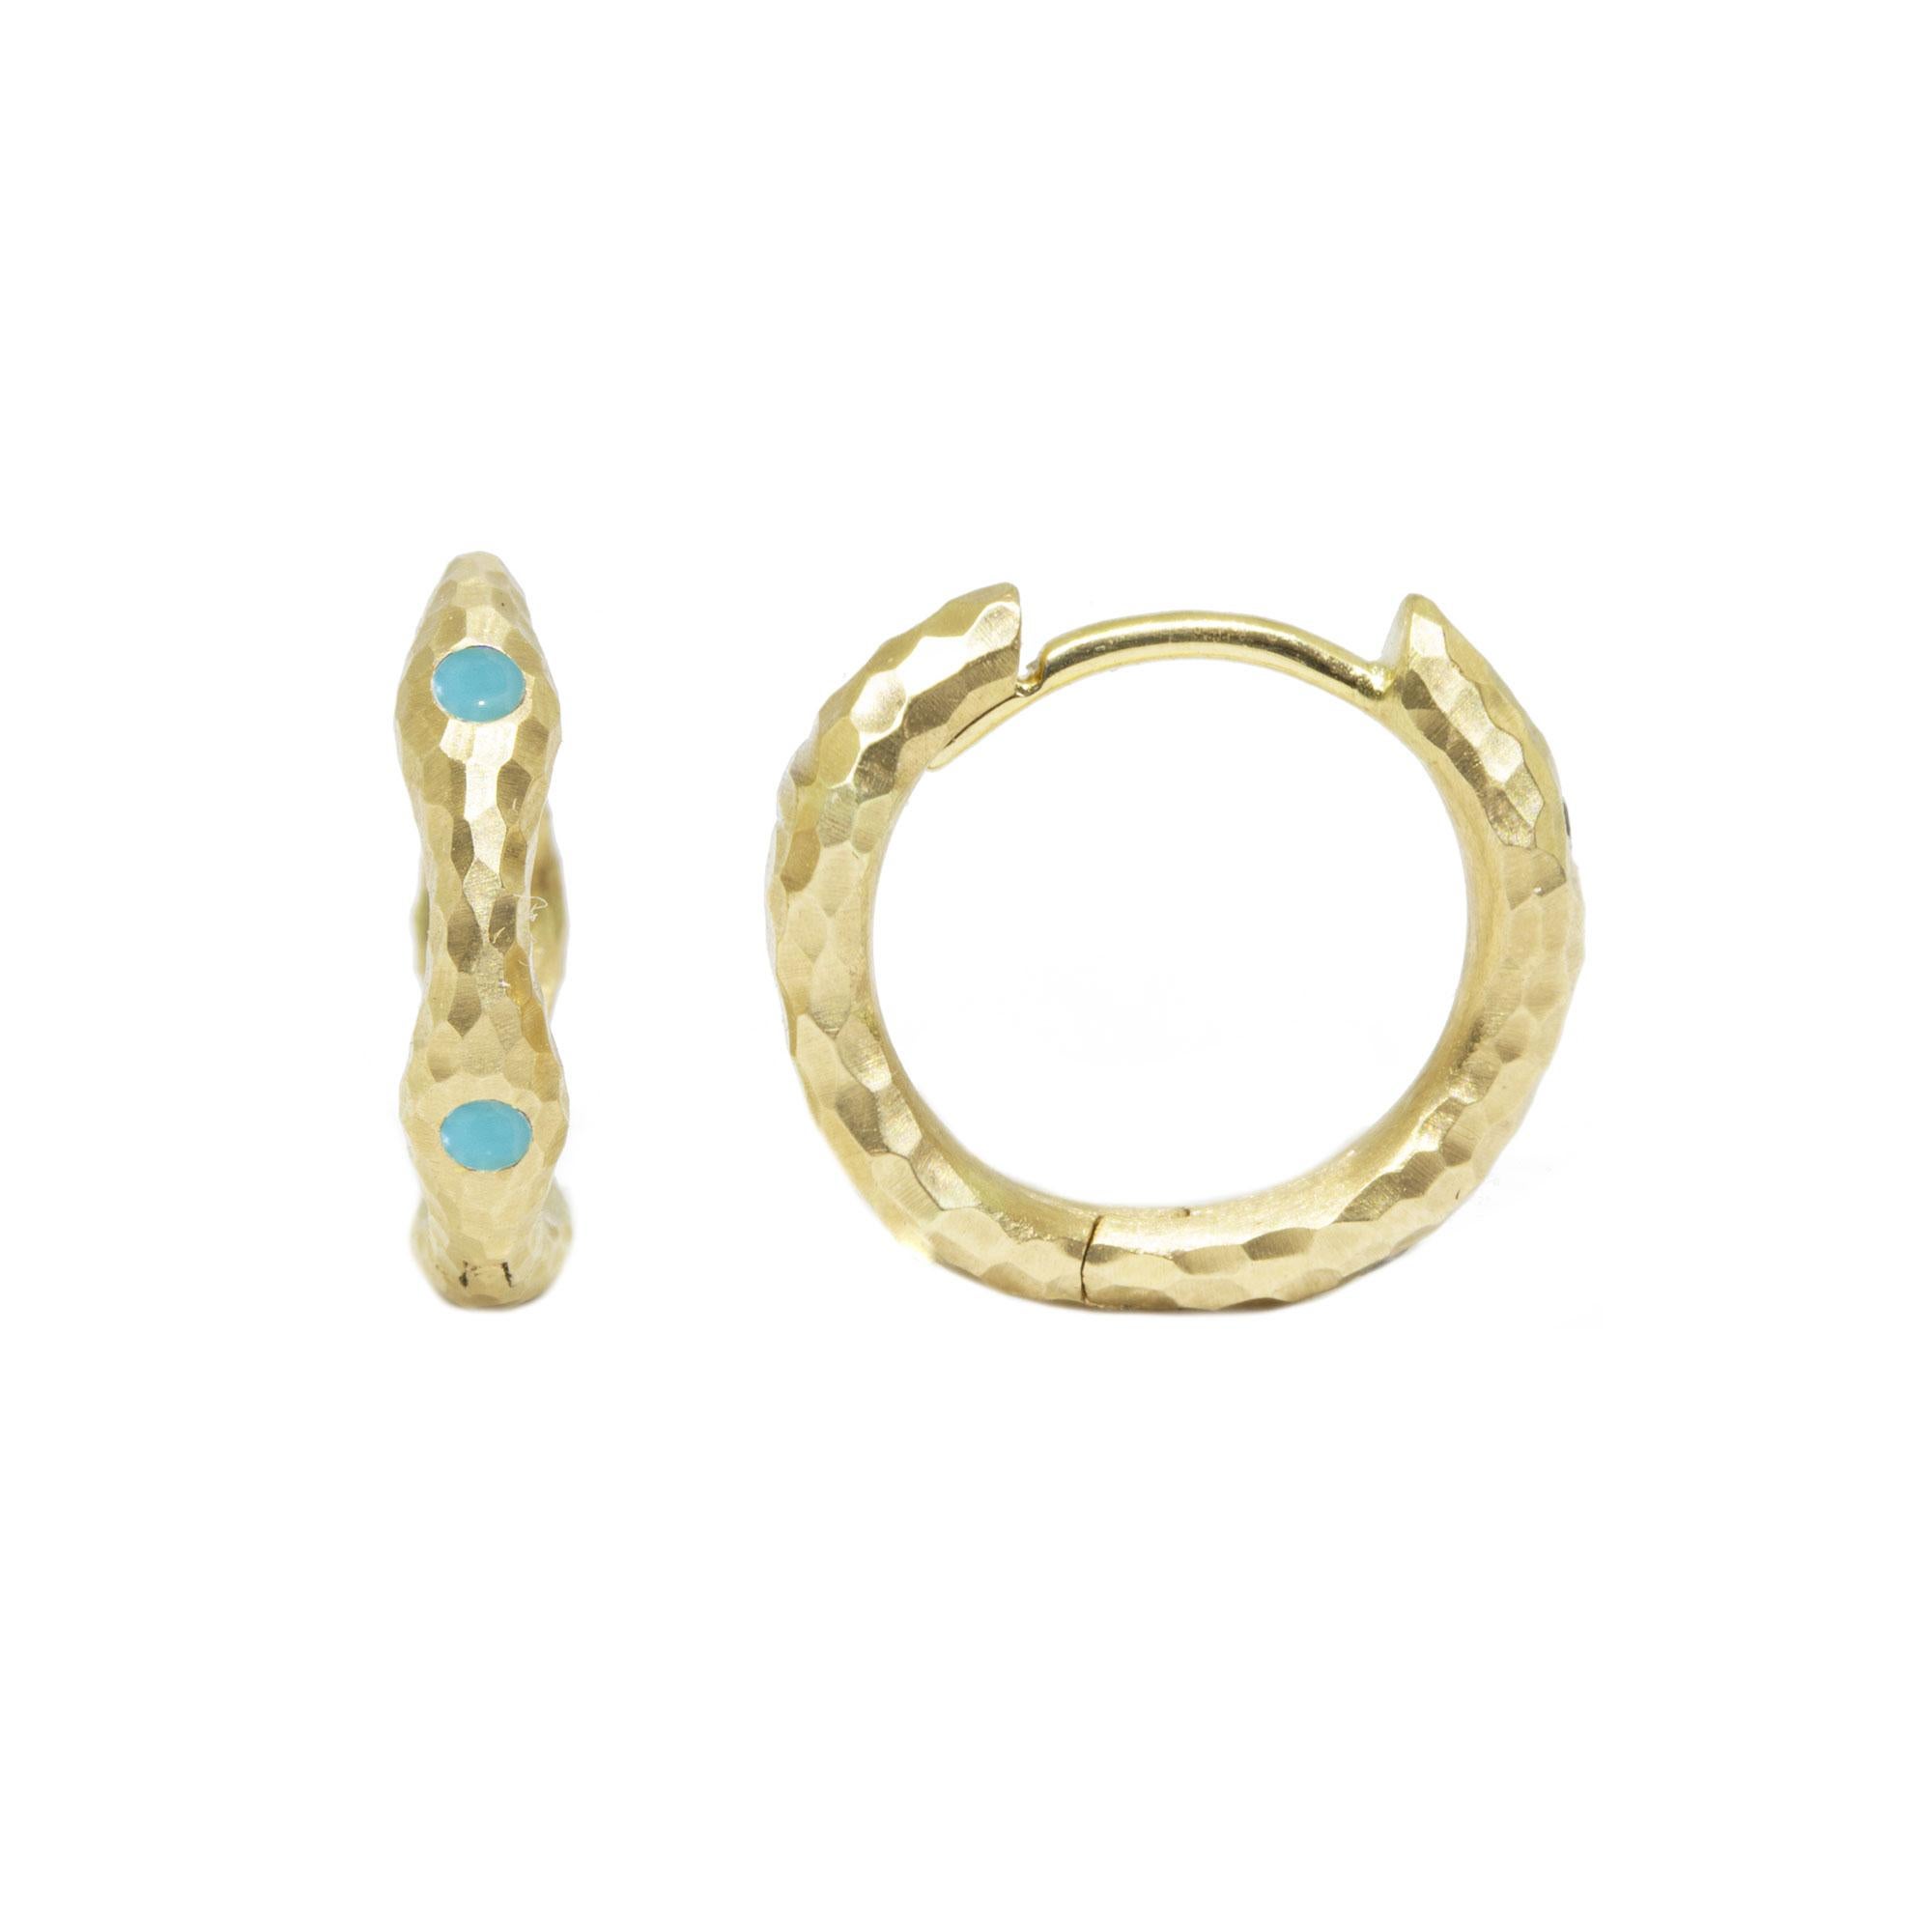 Turquoise for day, emerald for a night out: We designed a version of popular petite hoop that’s completely reversible. Each style comes with two types of gemstones—one set faces out, and you just flip the hoop around for a completely different look.